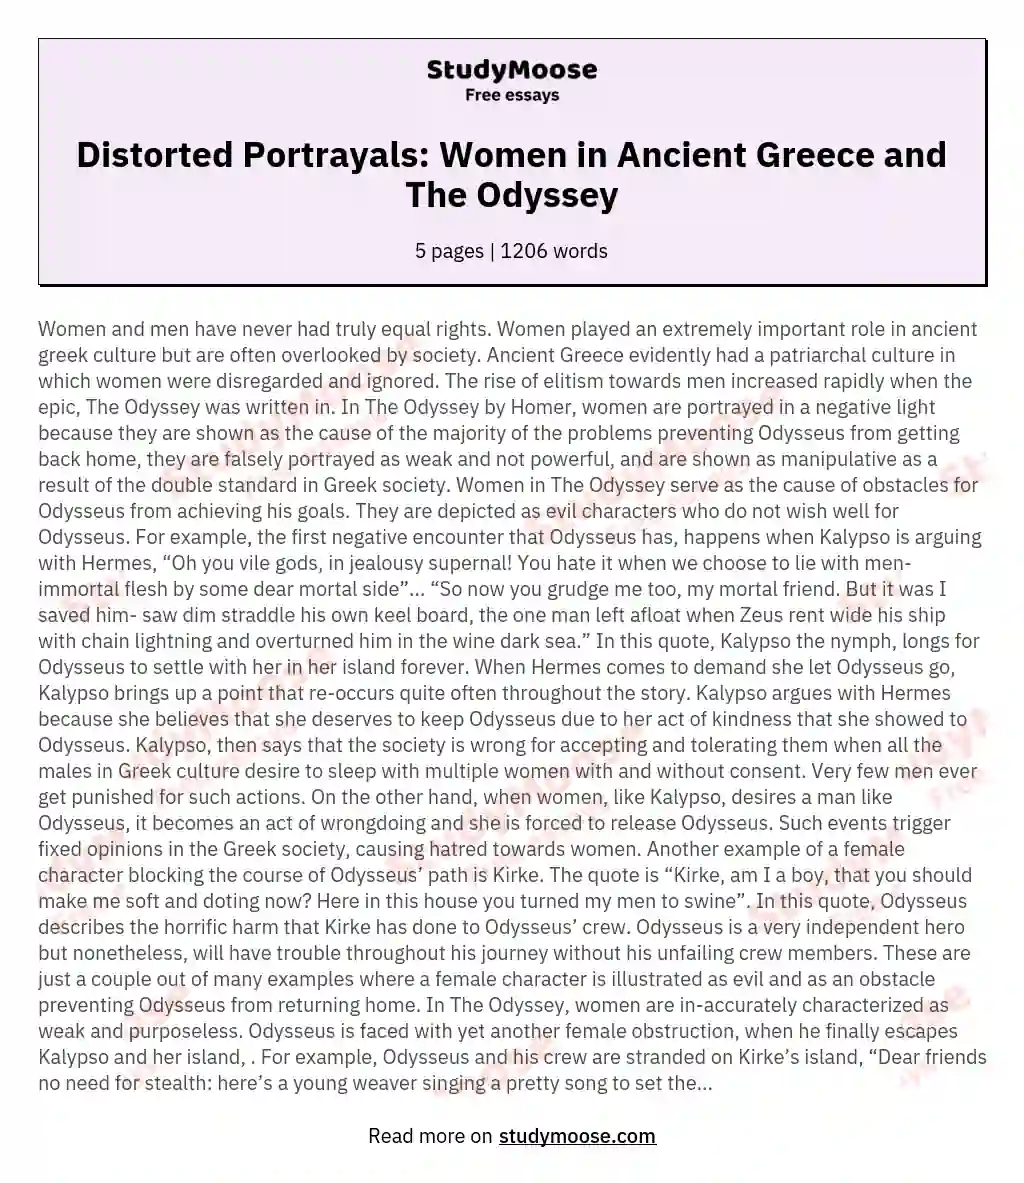 Distorted Portrayals: Women in Ancient Greece and The Odyssey essay